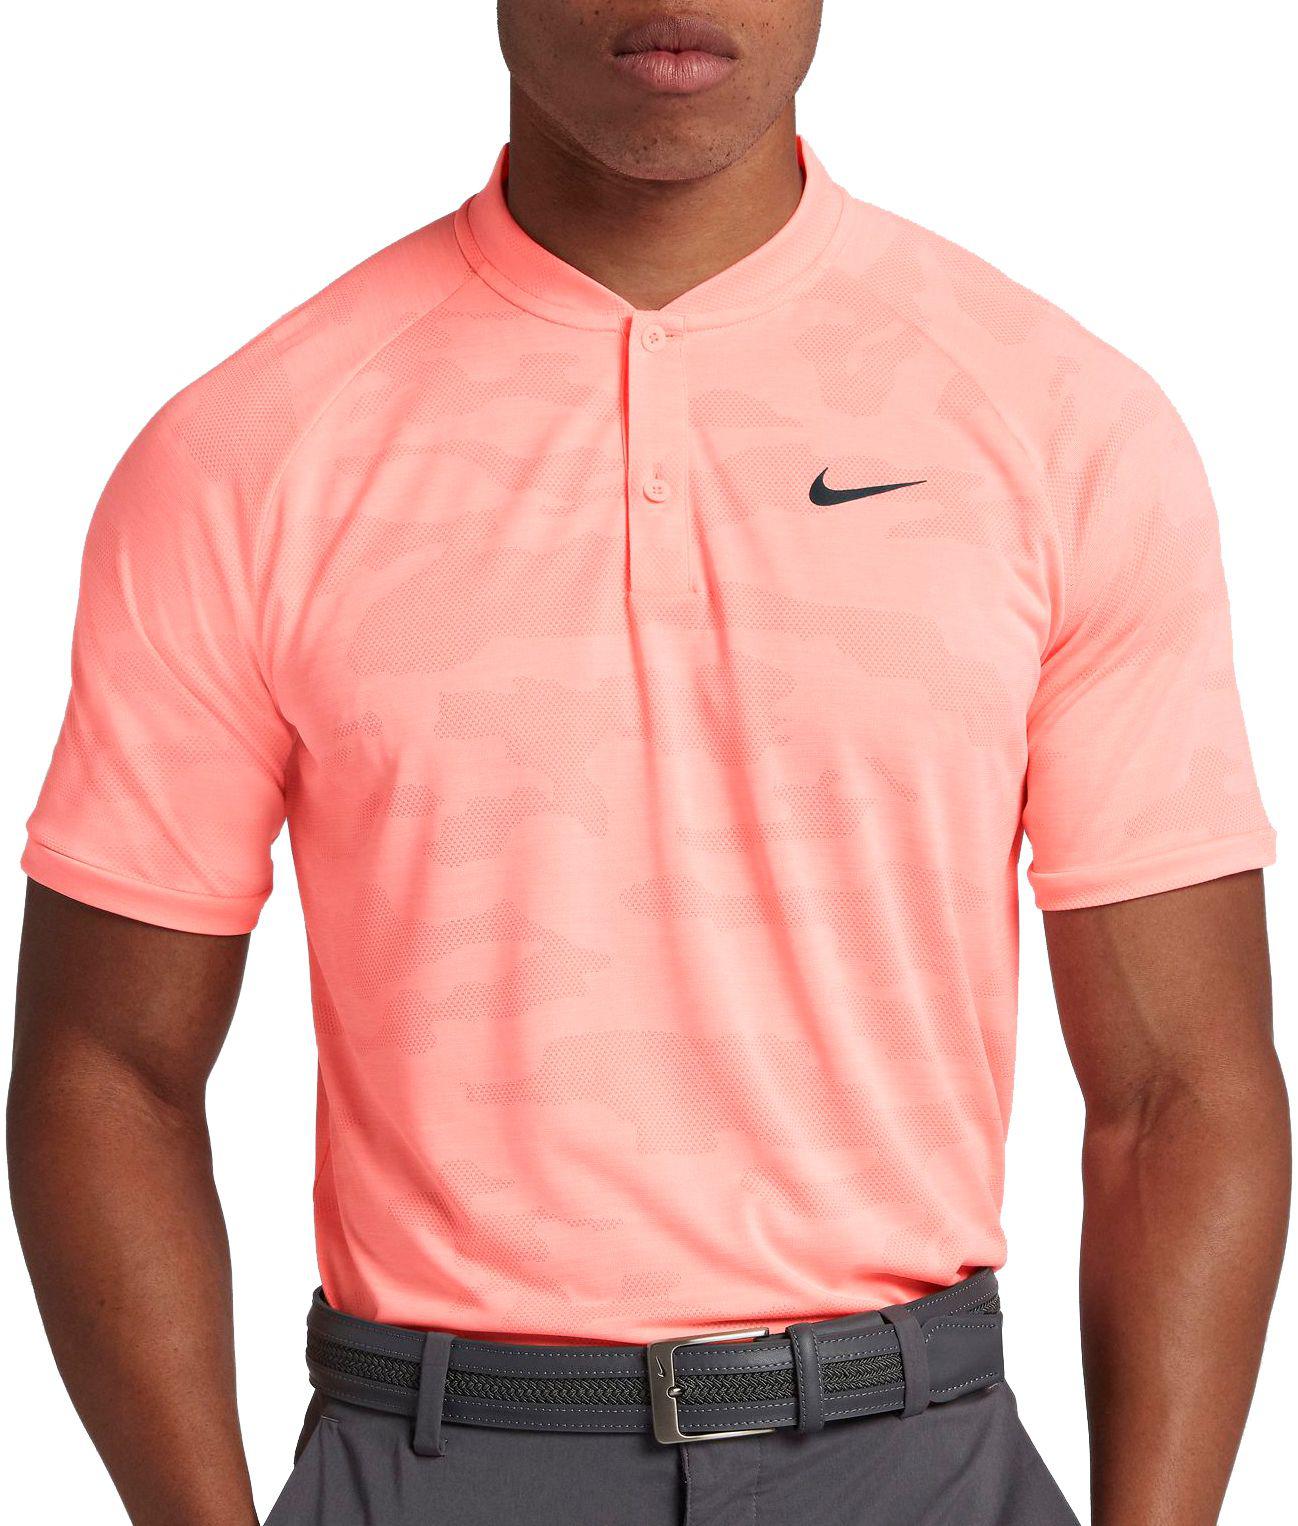 tiger woods shirts for sale